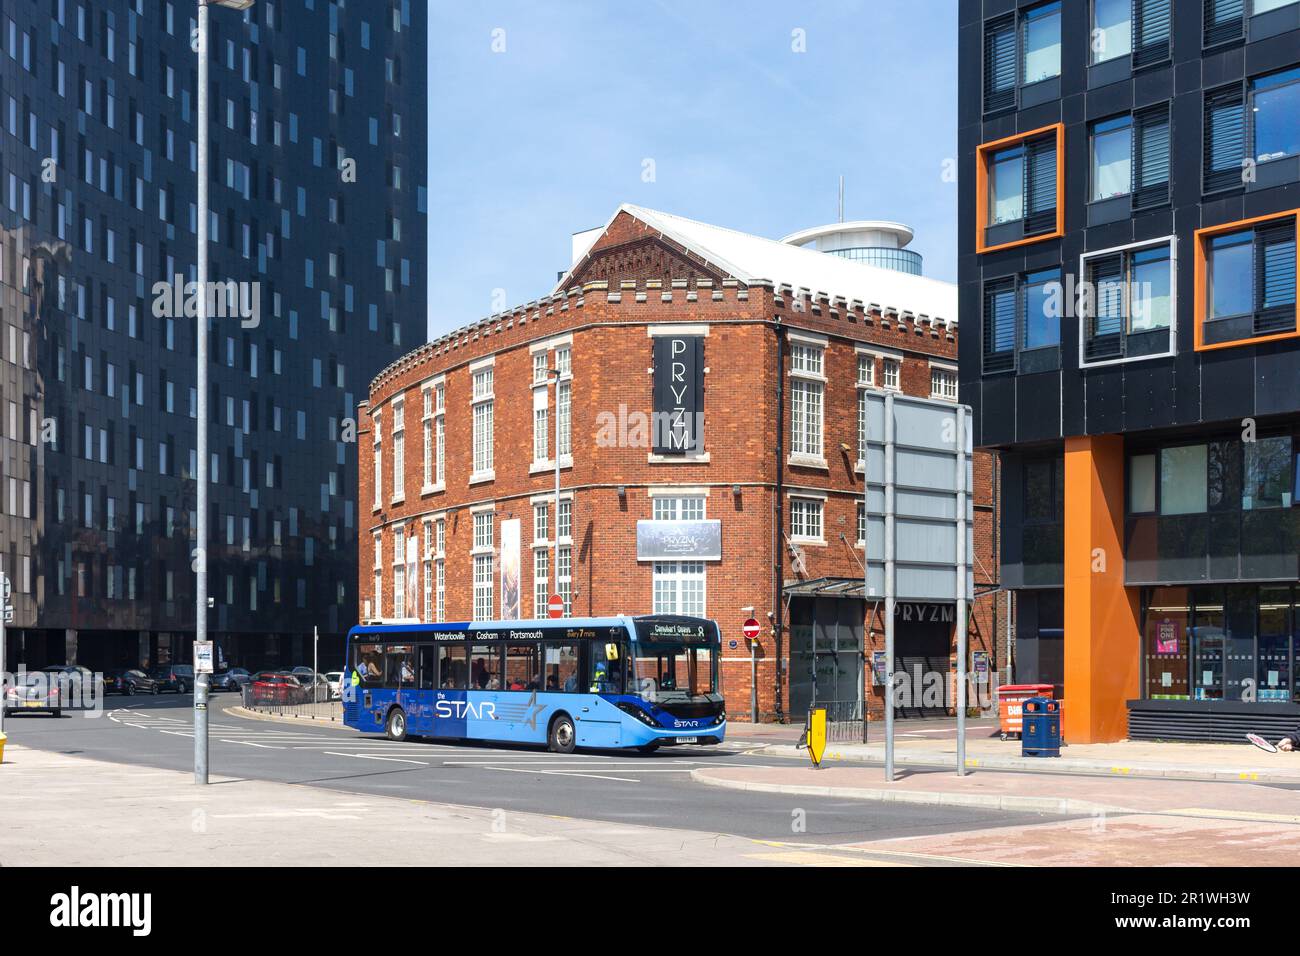 Le bus local Star, Stanhope Road, Portsmouth, Hampshire, Angleterre, Royaume-Uni Banque D'Images